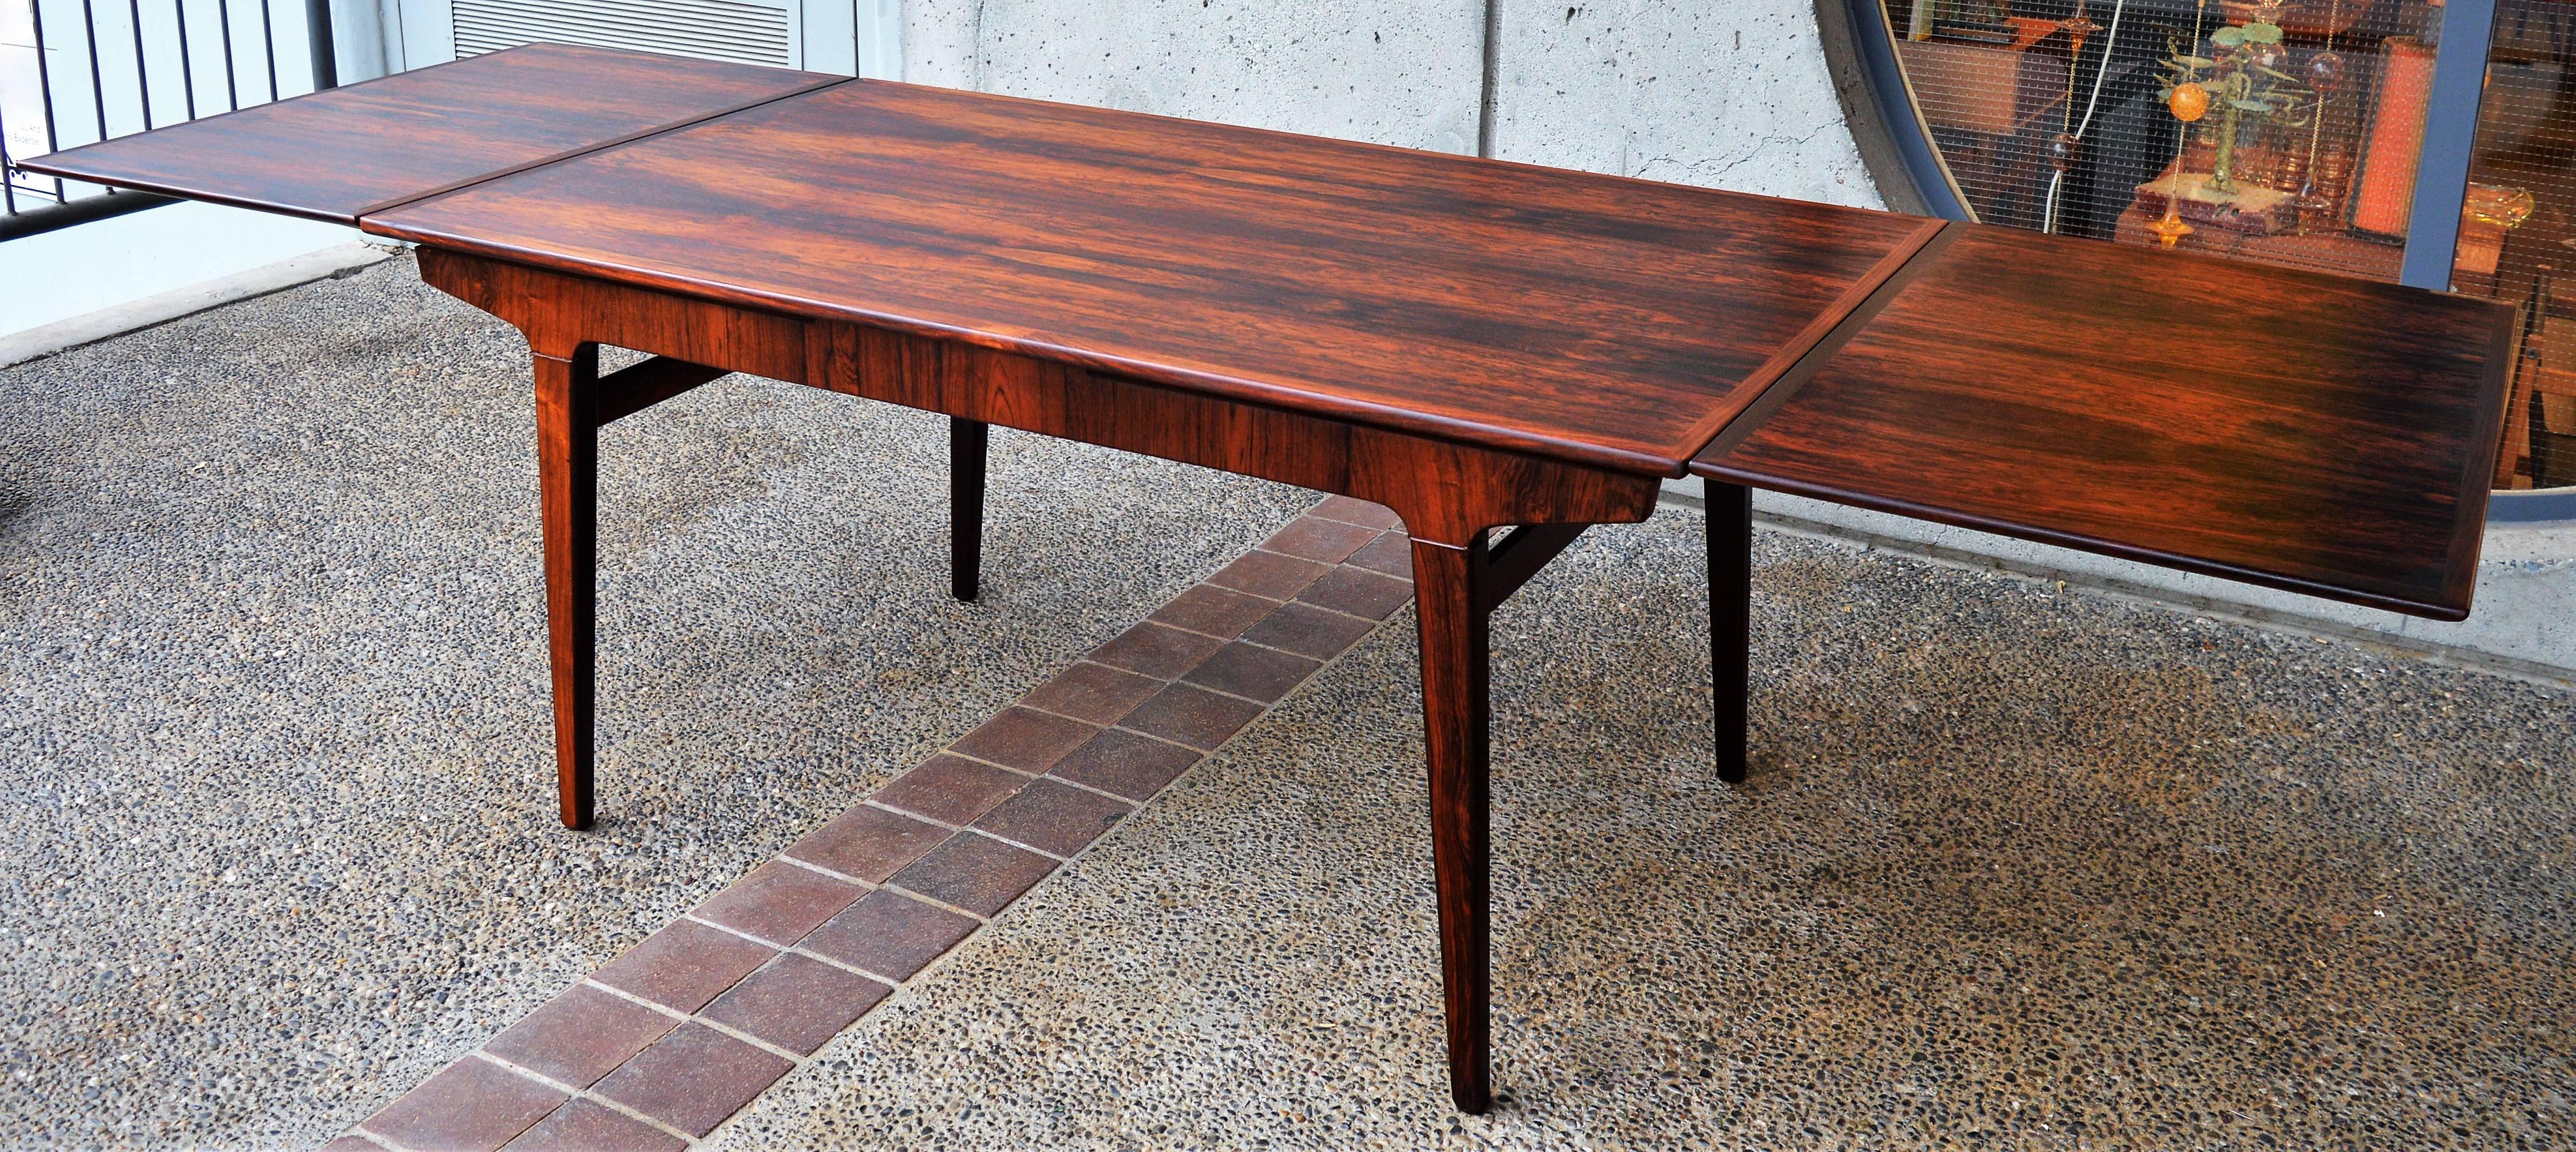 This amazing Danish modern rosewood dining table by Johannes Andersen, features his iconic splayed legs that melds into the sculptural table apron - in this version with a subtle wood ring at the top of the legs. The contouring of the apron, the